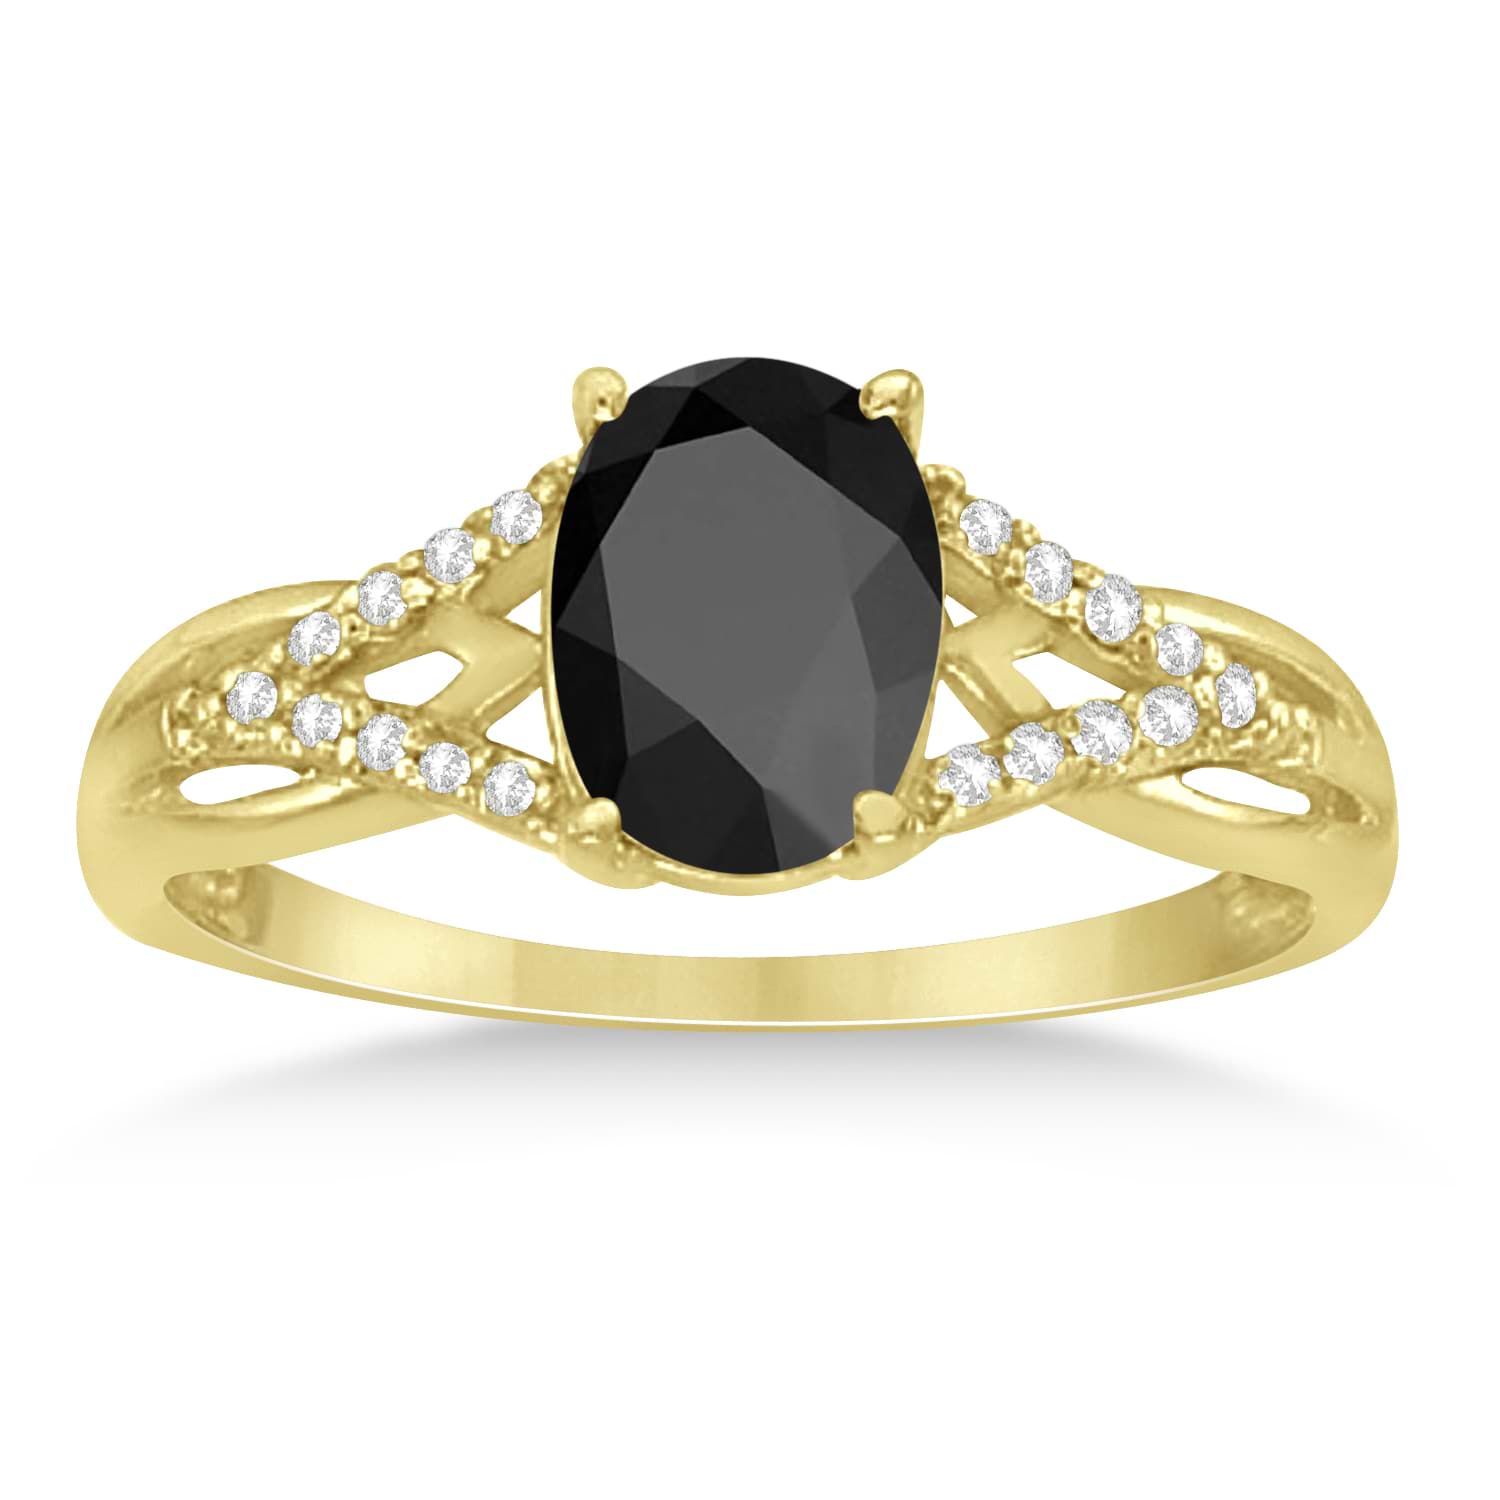 Oval Black Onyx and Diamond Cocktail Ring 14K Yellow Gold (1.62tcw)